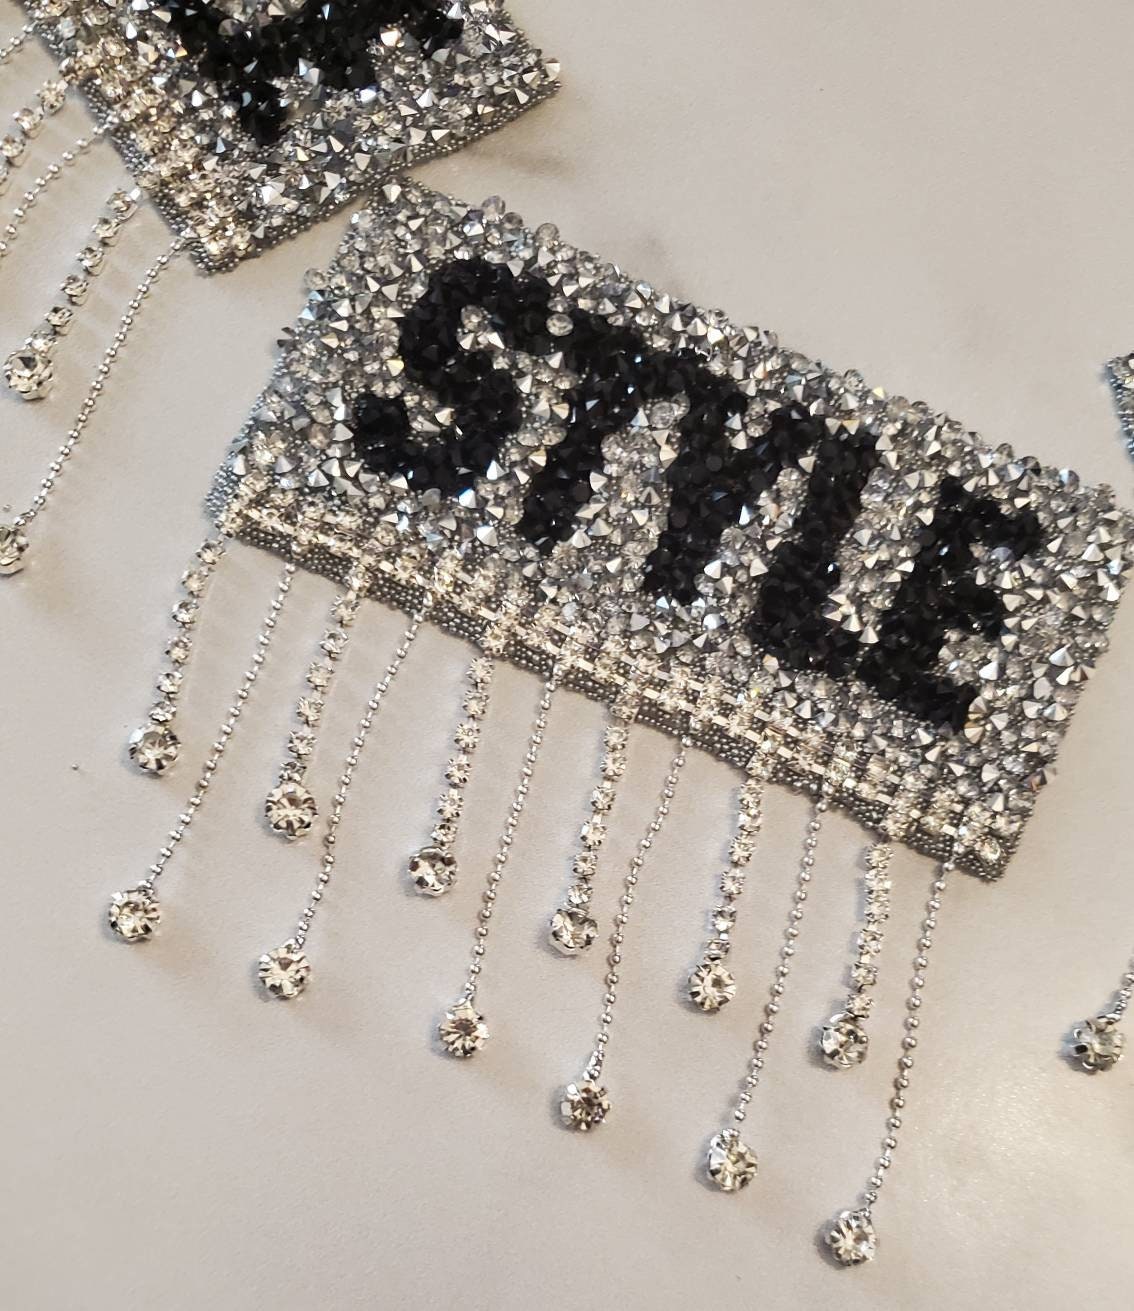 New Arrival, "STYLE" Blinged Out, Dripping Rhinestone Patch with Adhesive, Rhinestone Applique, Size 4"x4", Czech Rhinestones, DIY Applique